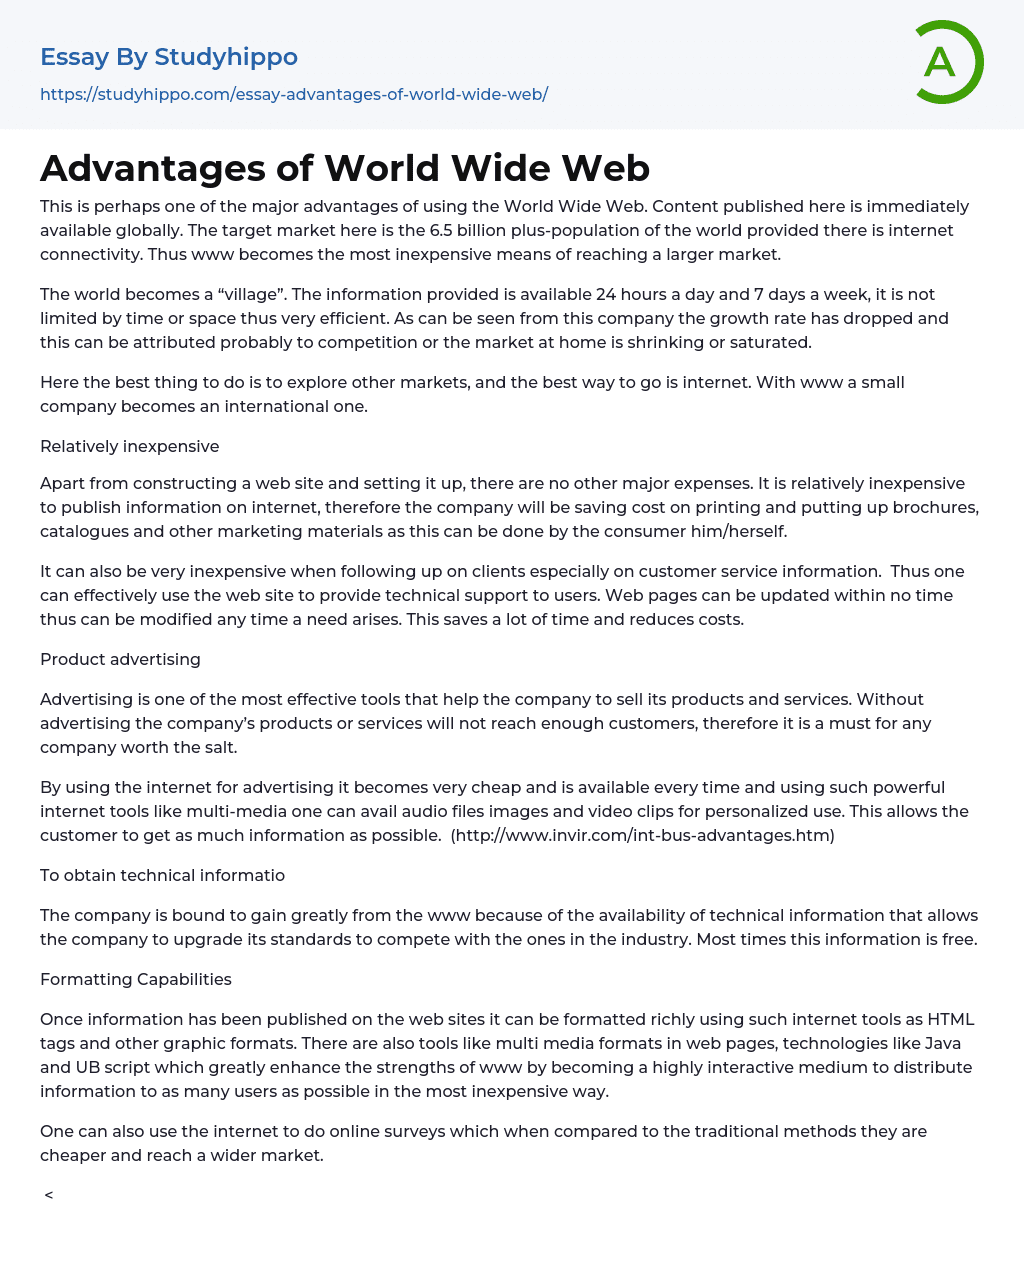 Advantages of World Wide Web Essay Example